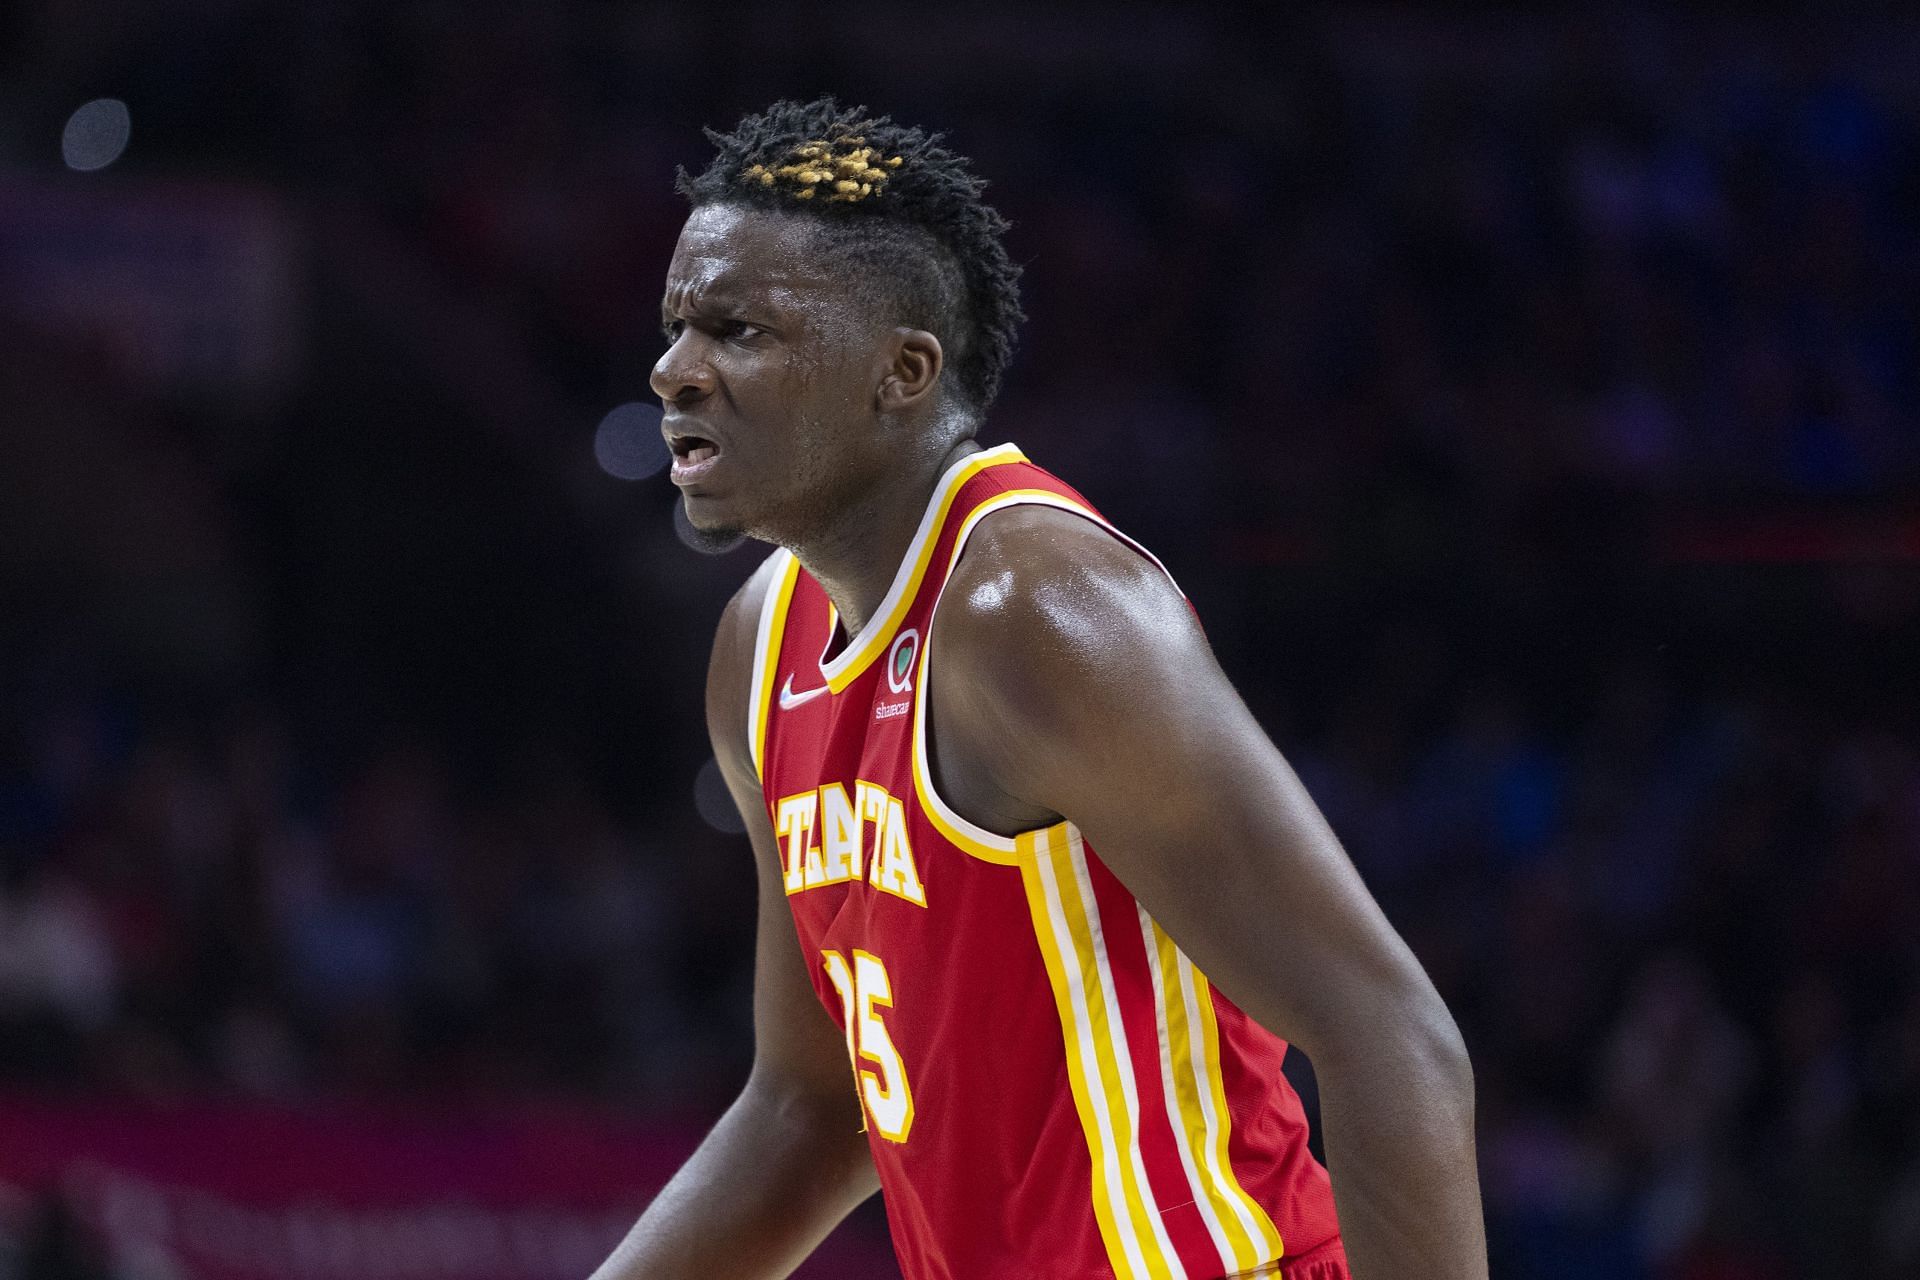 Clint Capela #15 of the Atlanta Hawks looks on against the Philadelphia 76ers in the second half at the Wells Fargo Center on October 30, 2021 in Philadelphia, Pennsylvania. The 76ers defeated the Hawks 122-94.